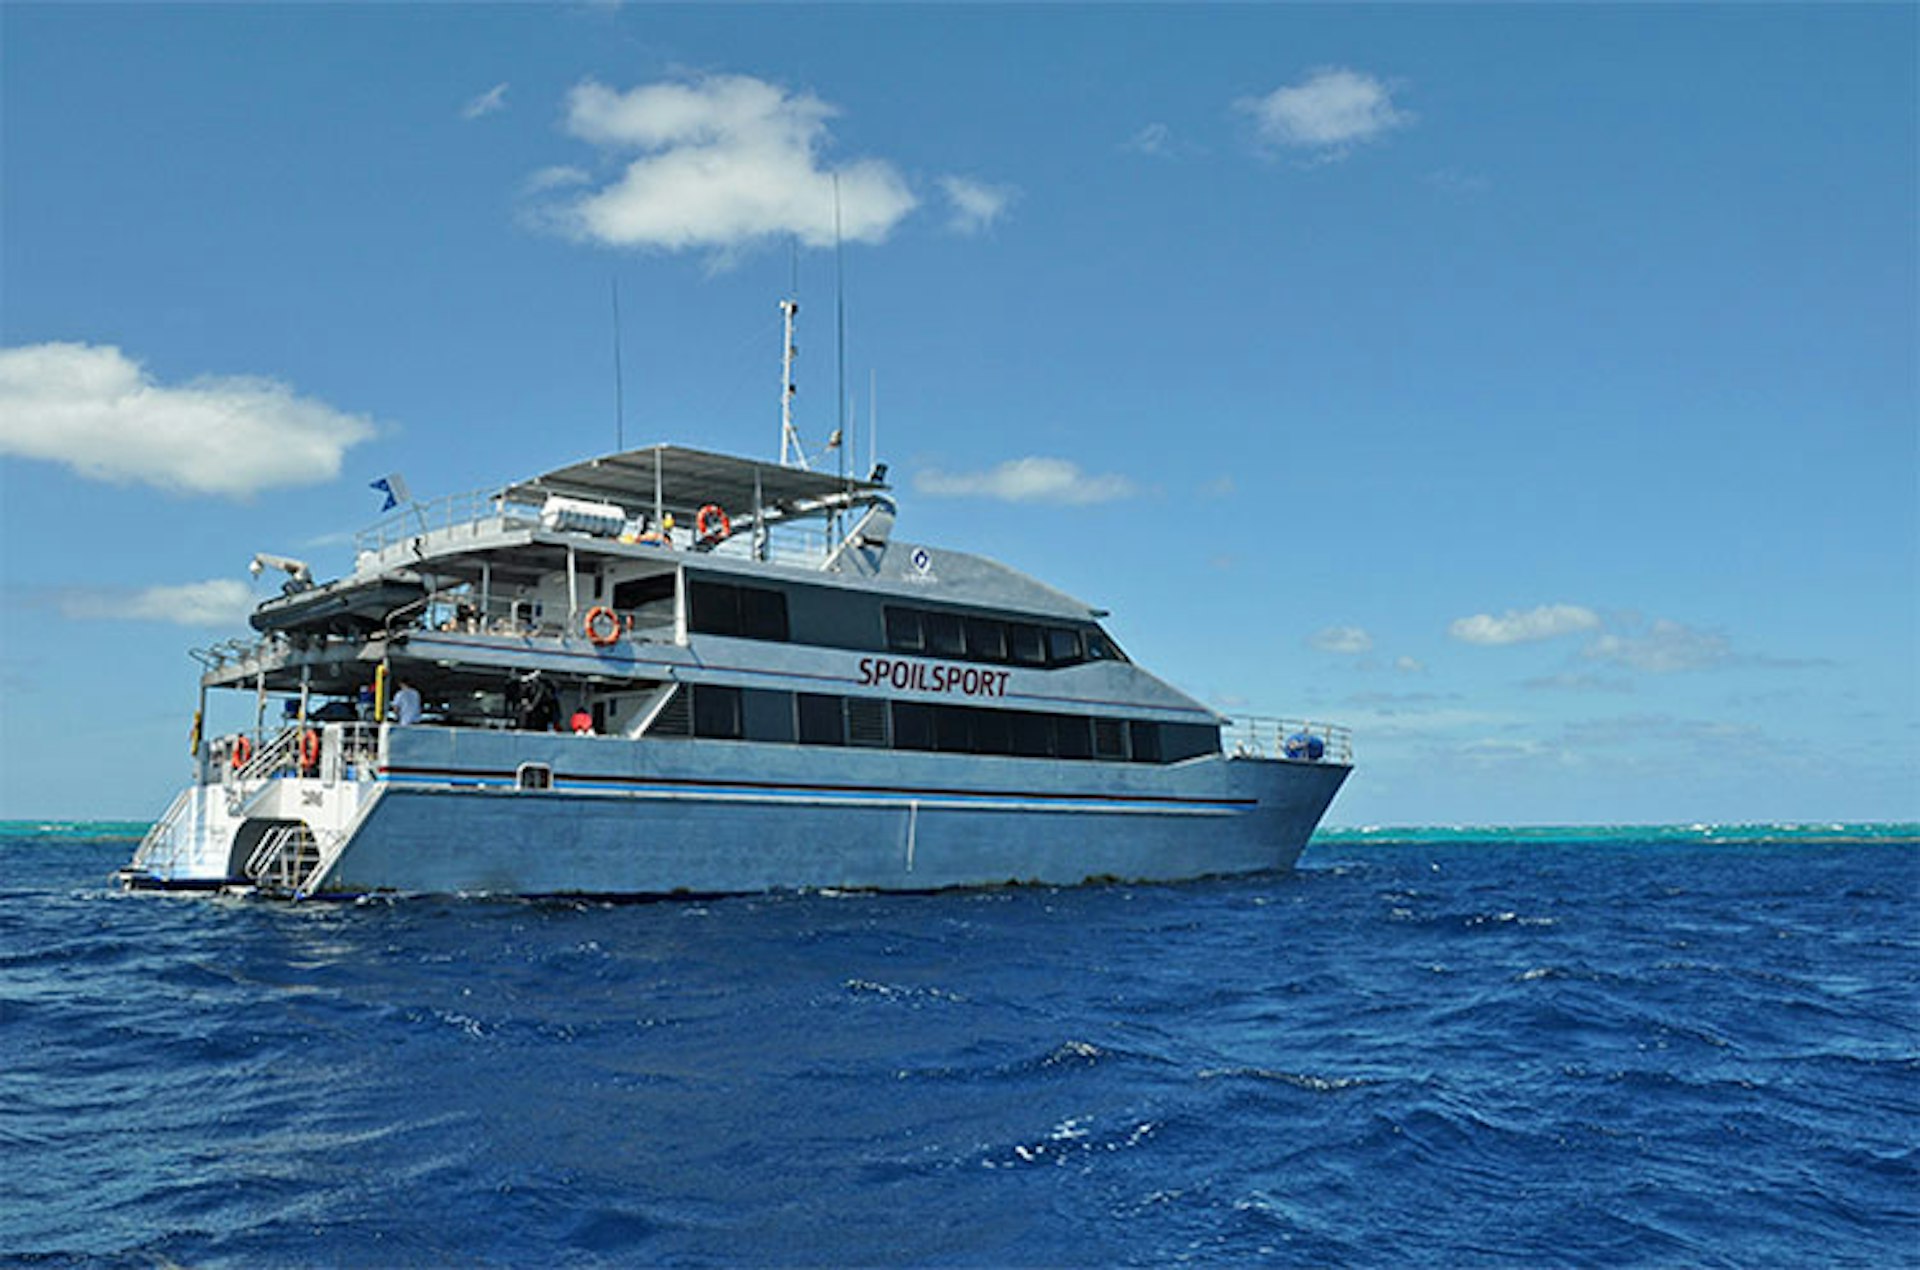 All aboard the Spoilsport to cruise remote reaches of Australia's Great Barrier Reef. Image by Patrick Kinsella / Lonely Planet